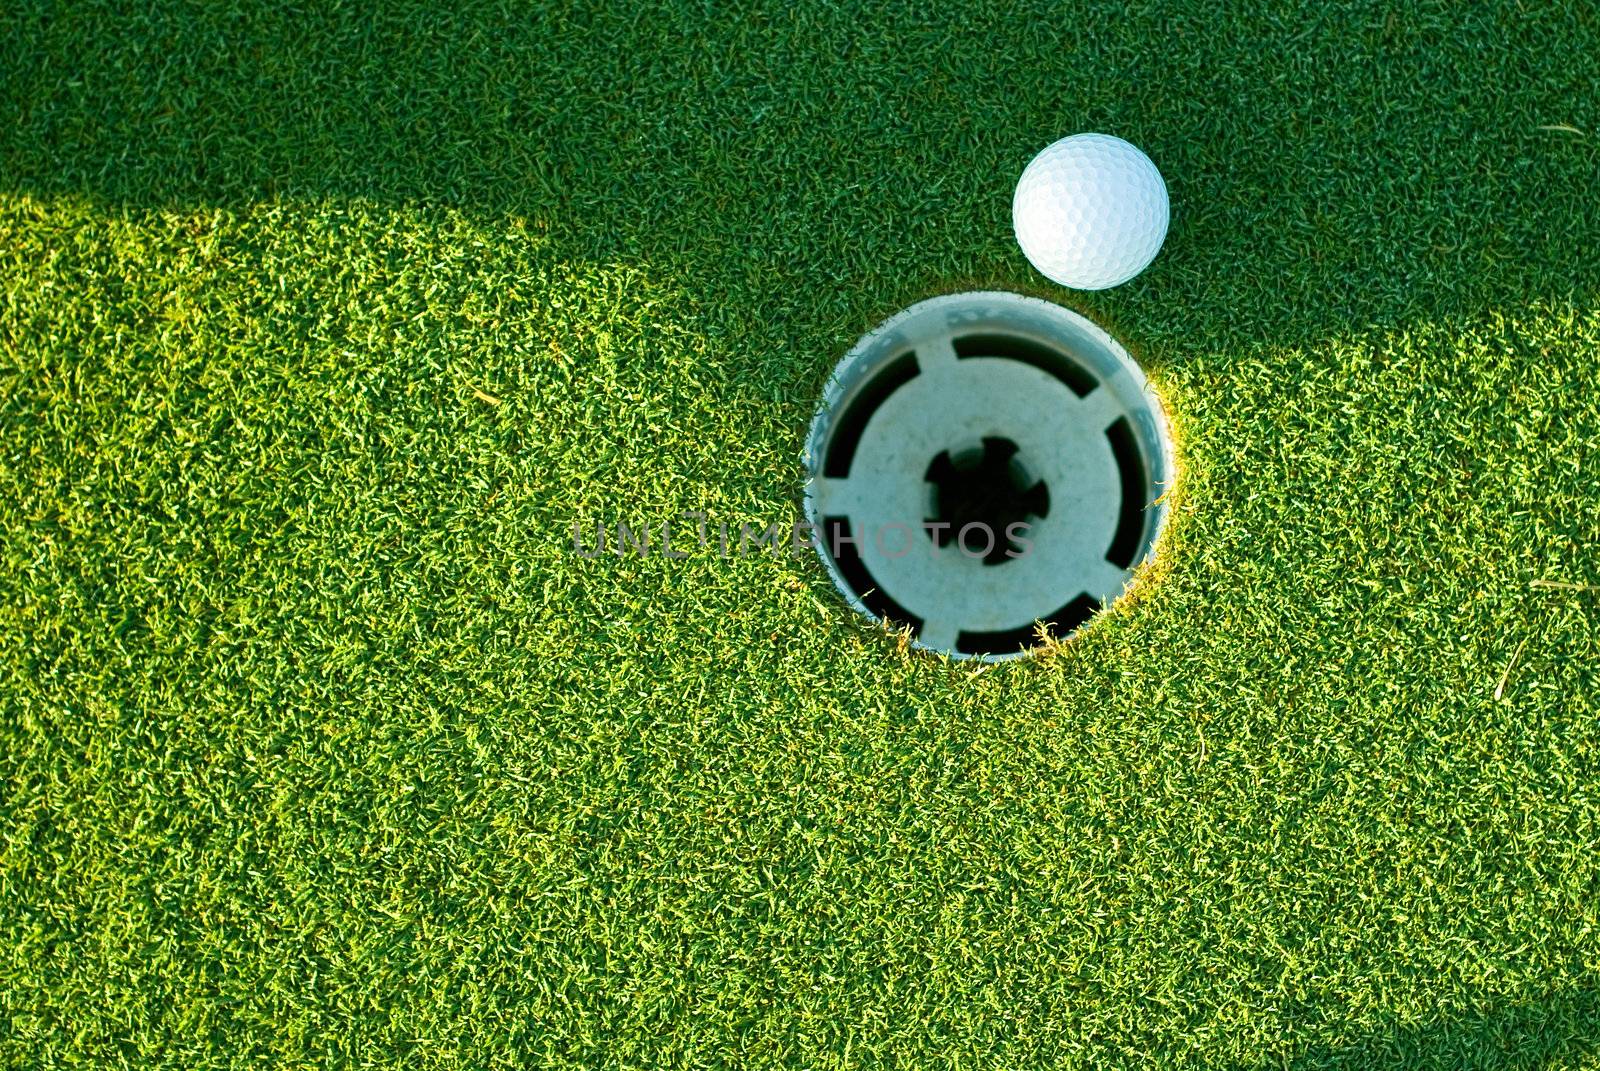 Golf ball in shadow next to golf green hole